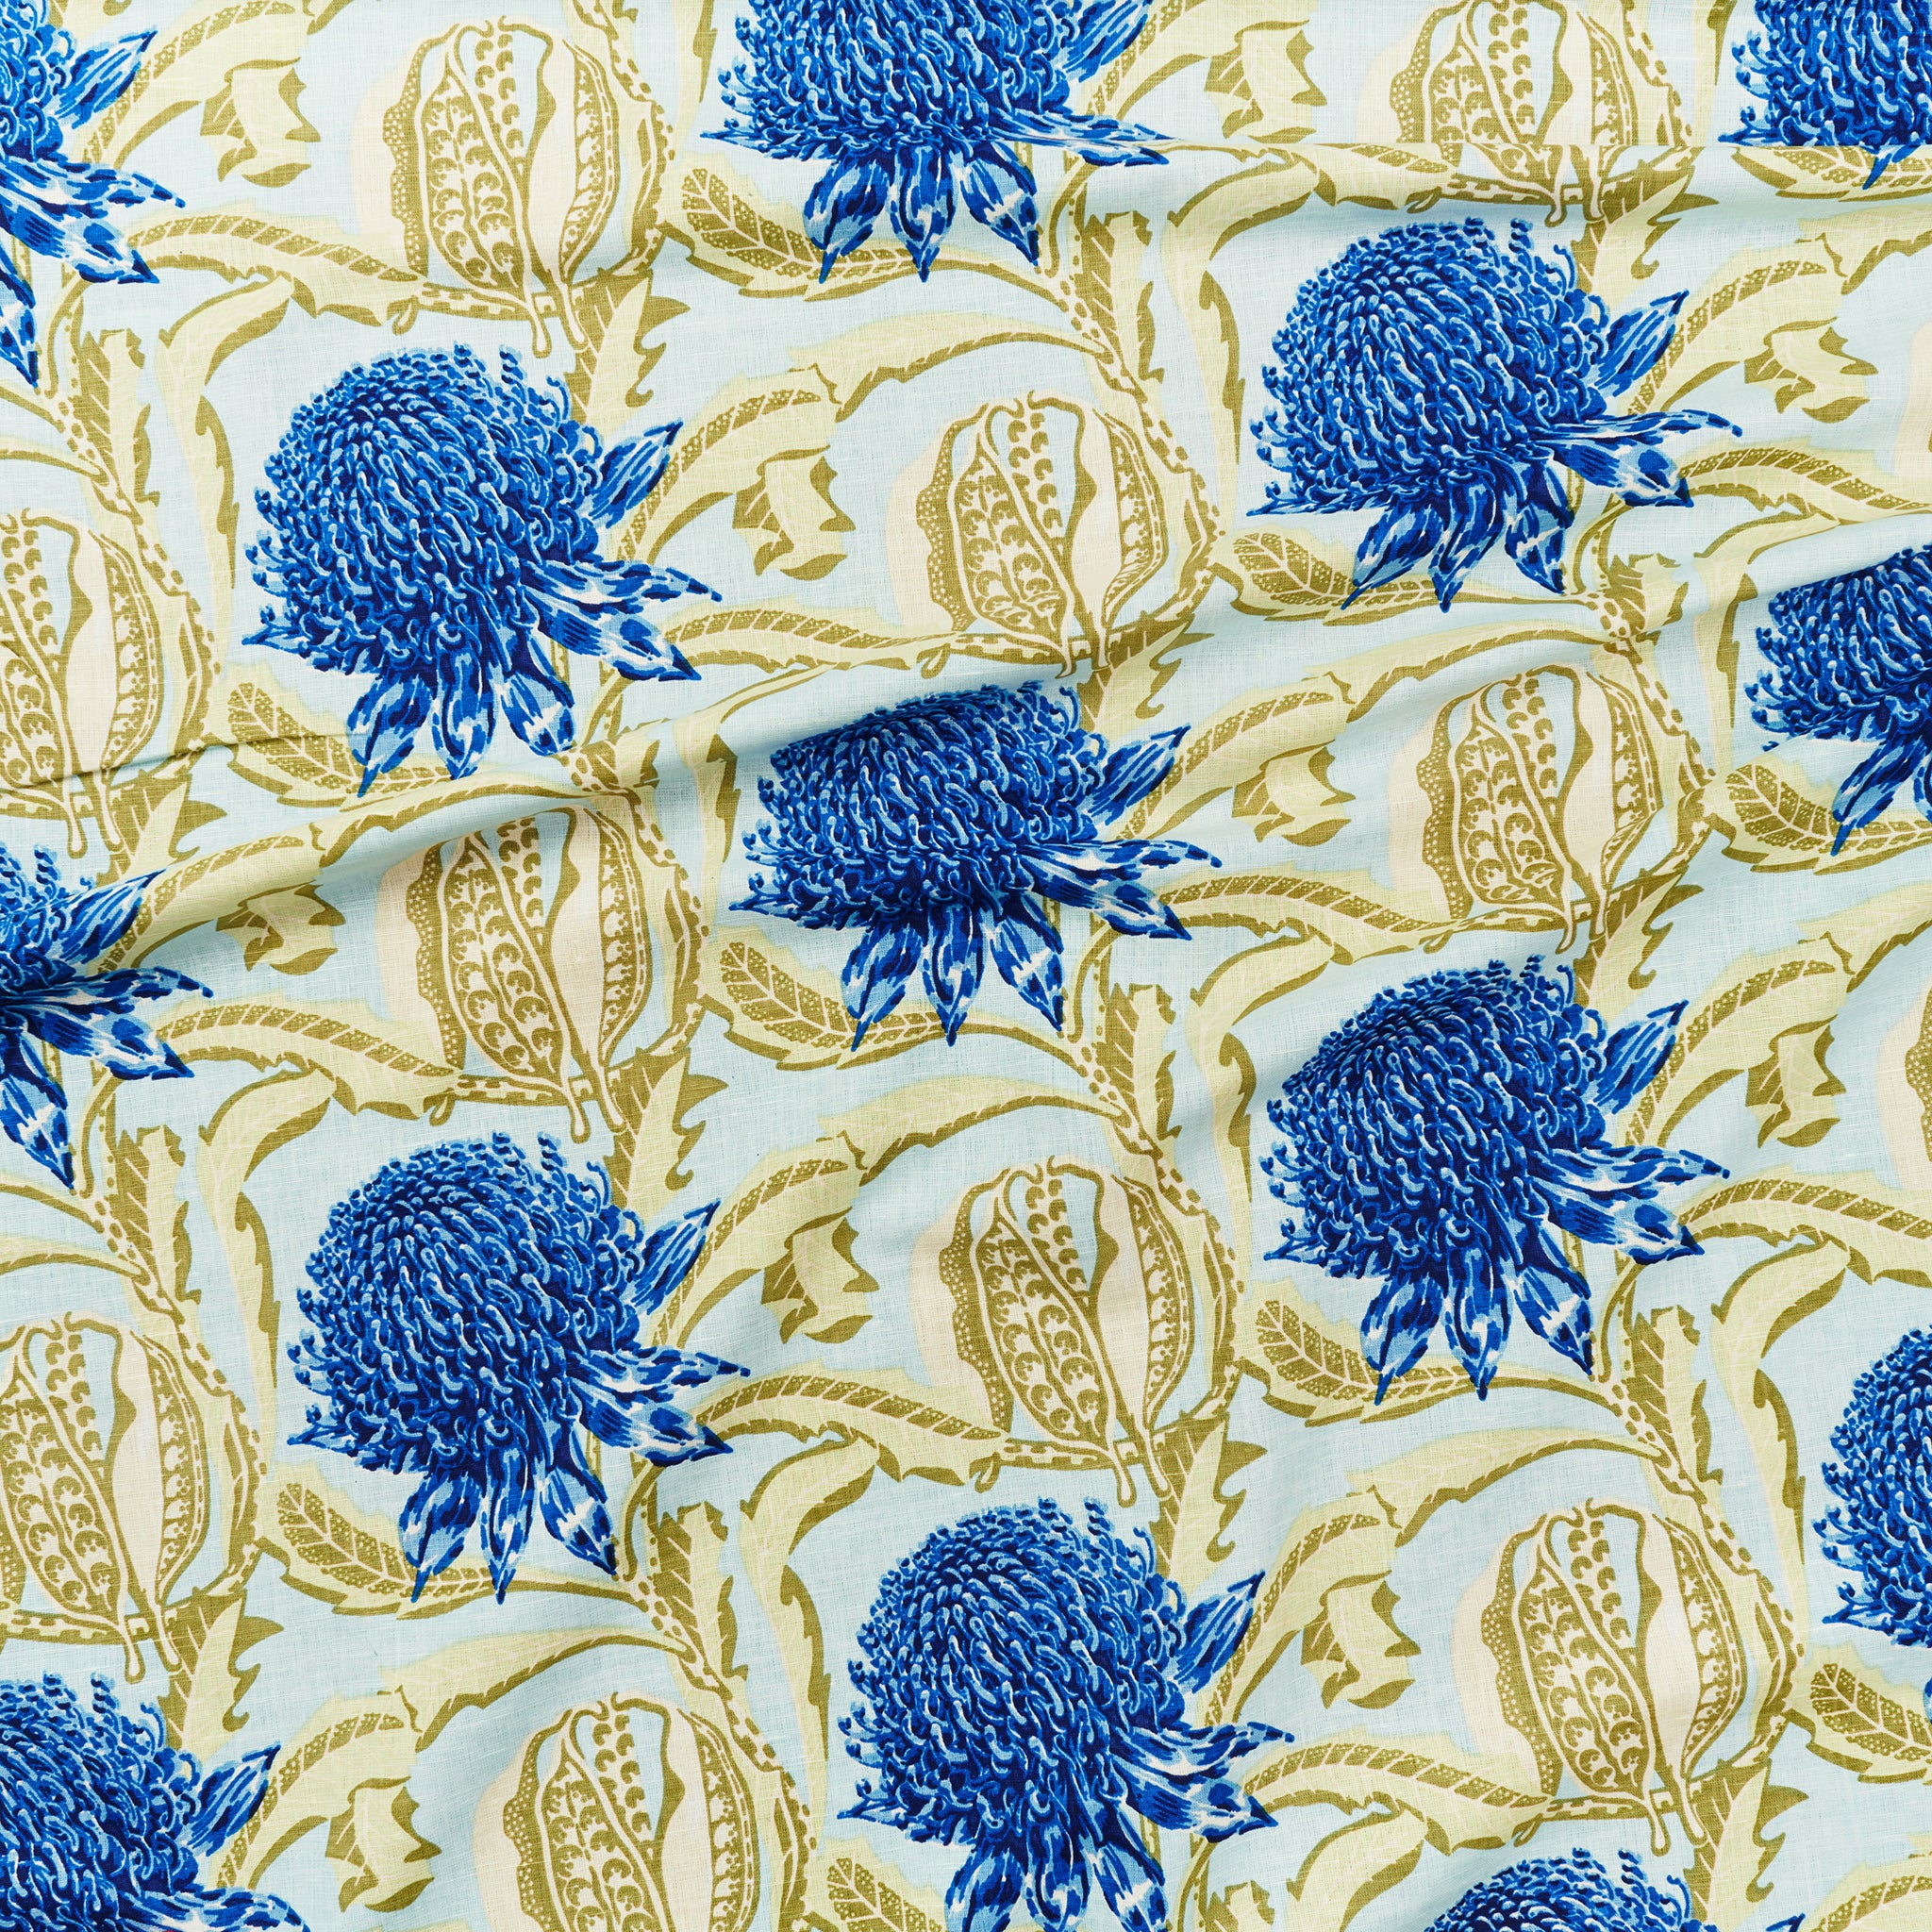 Draped fabric in a large-scale floral print in shades of royal blue and soft green on an acqua field.